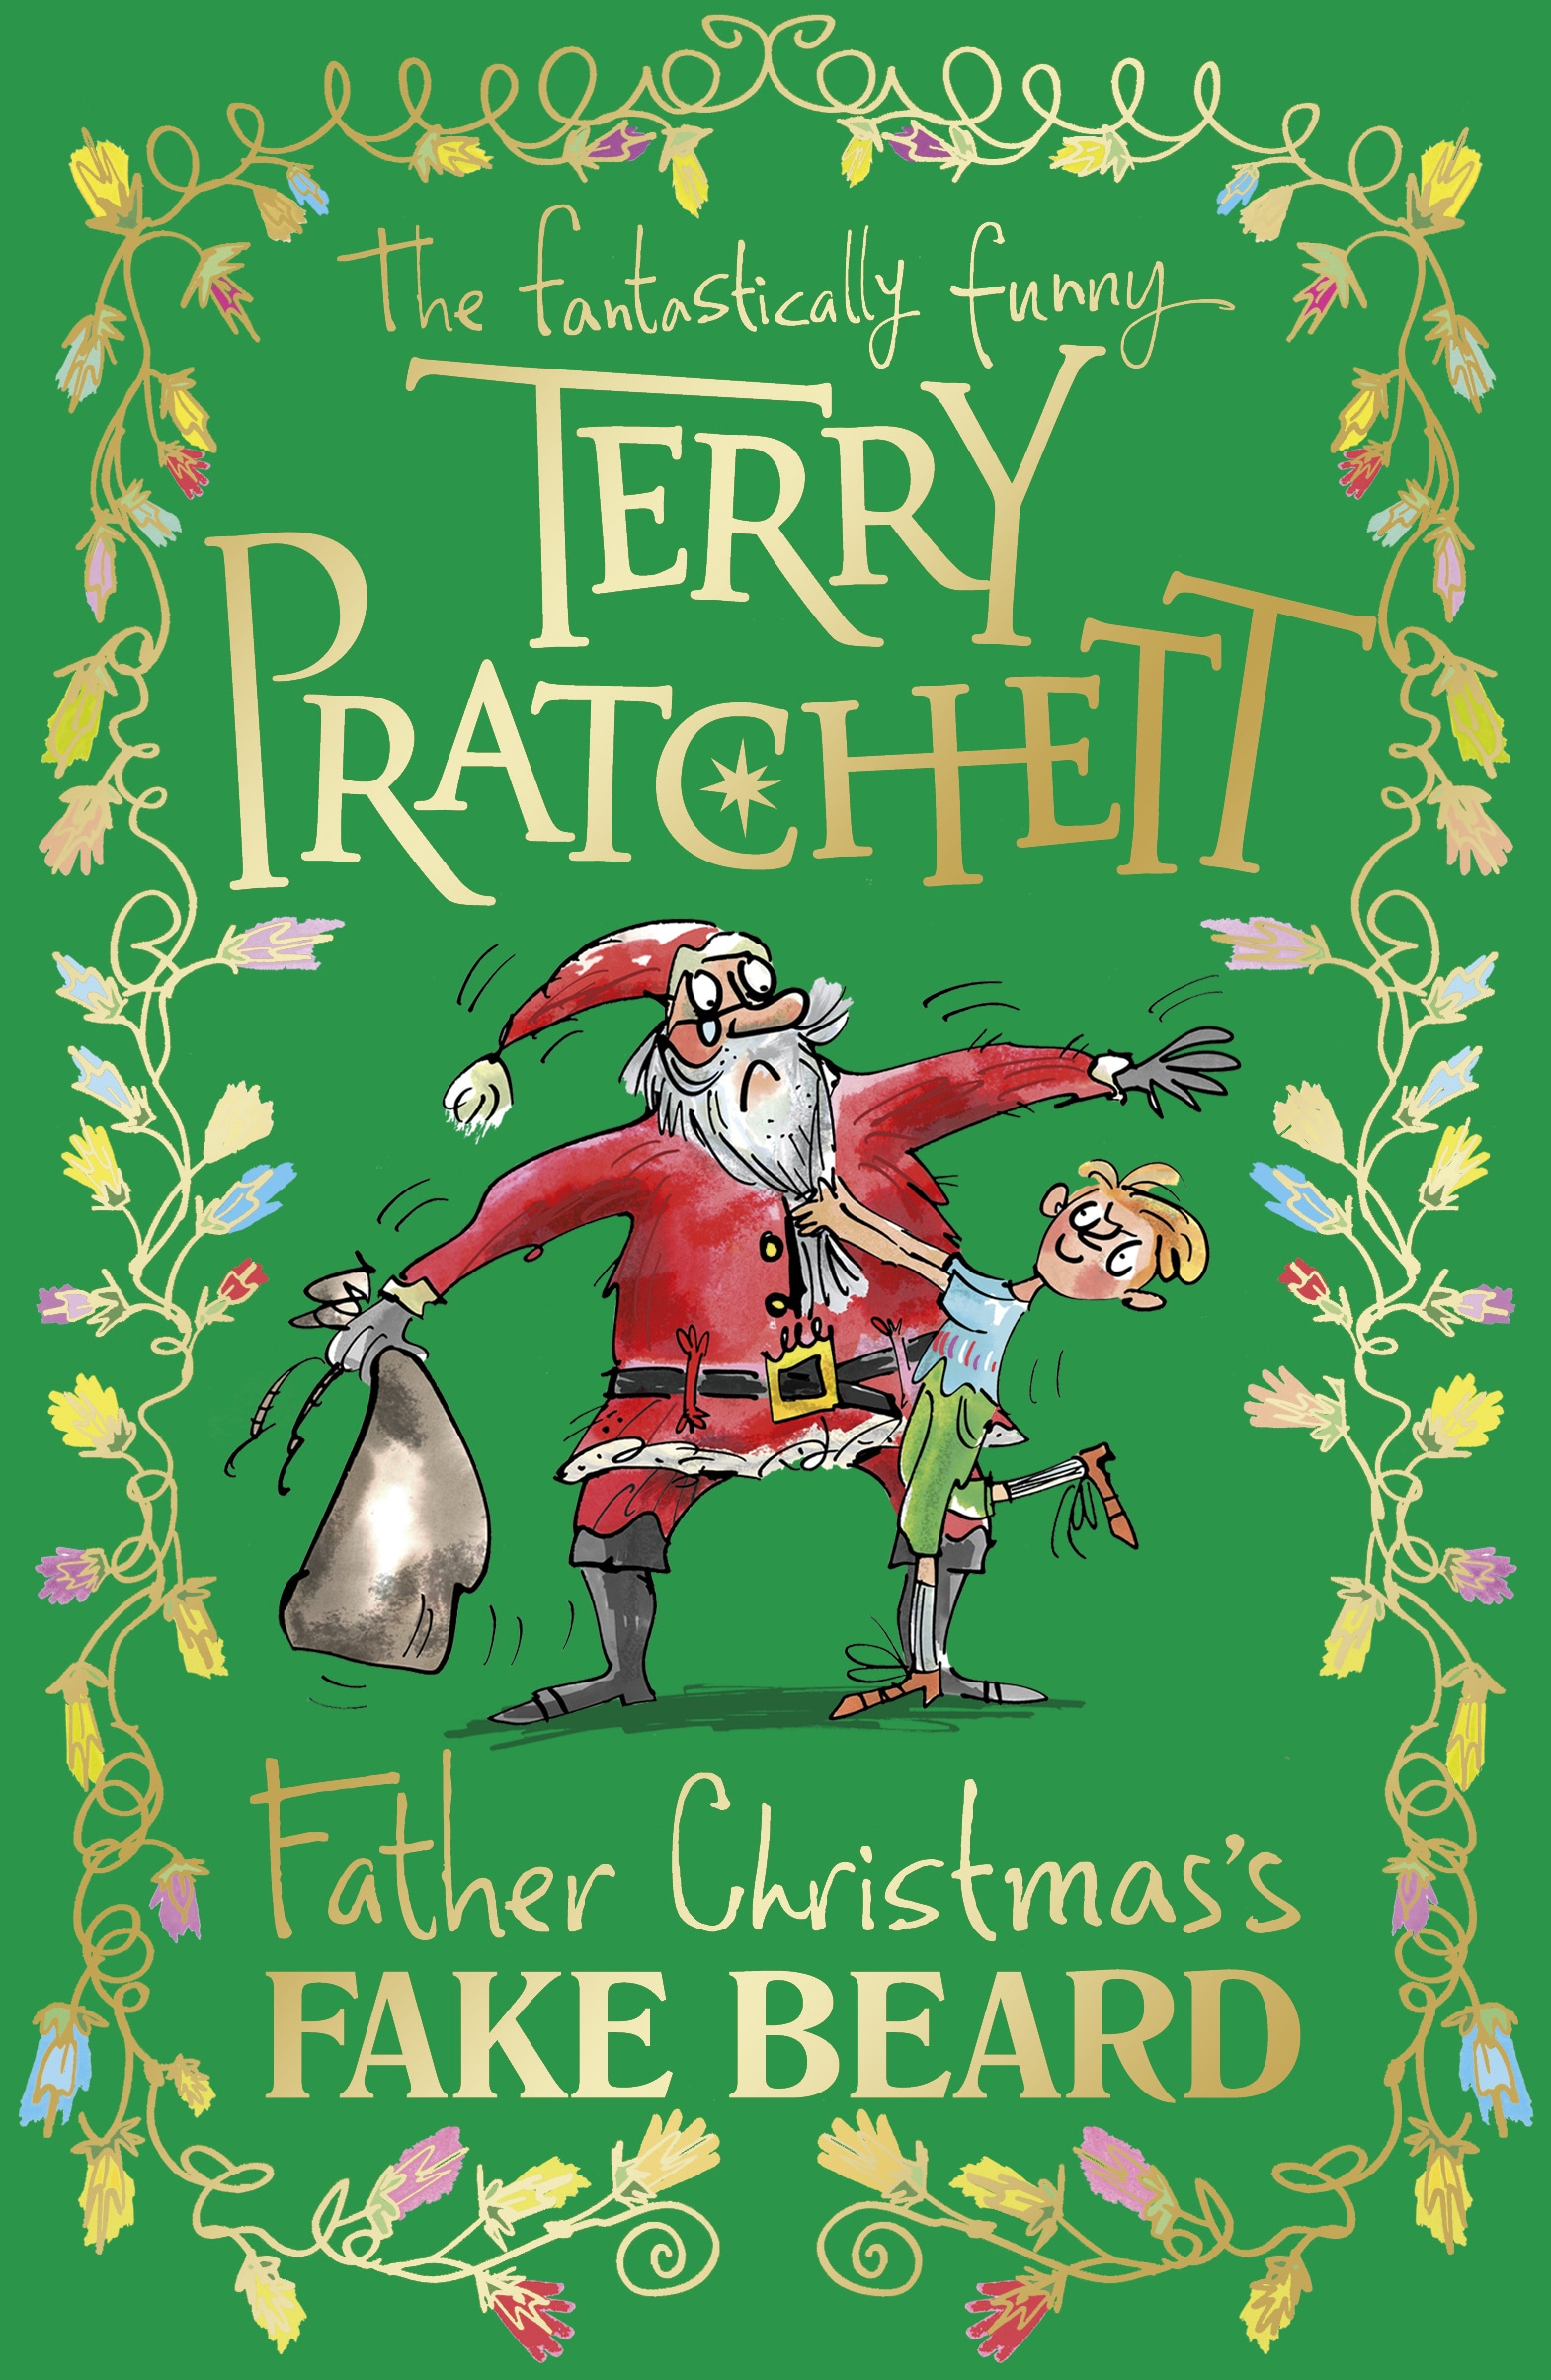 Book “Father Christmas's Fake Beard” by Terry Pratchett — October 18, 2018